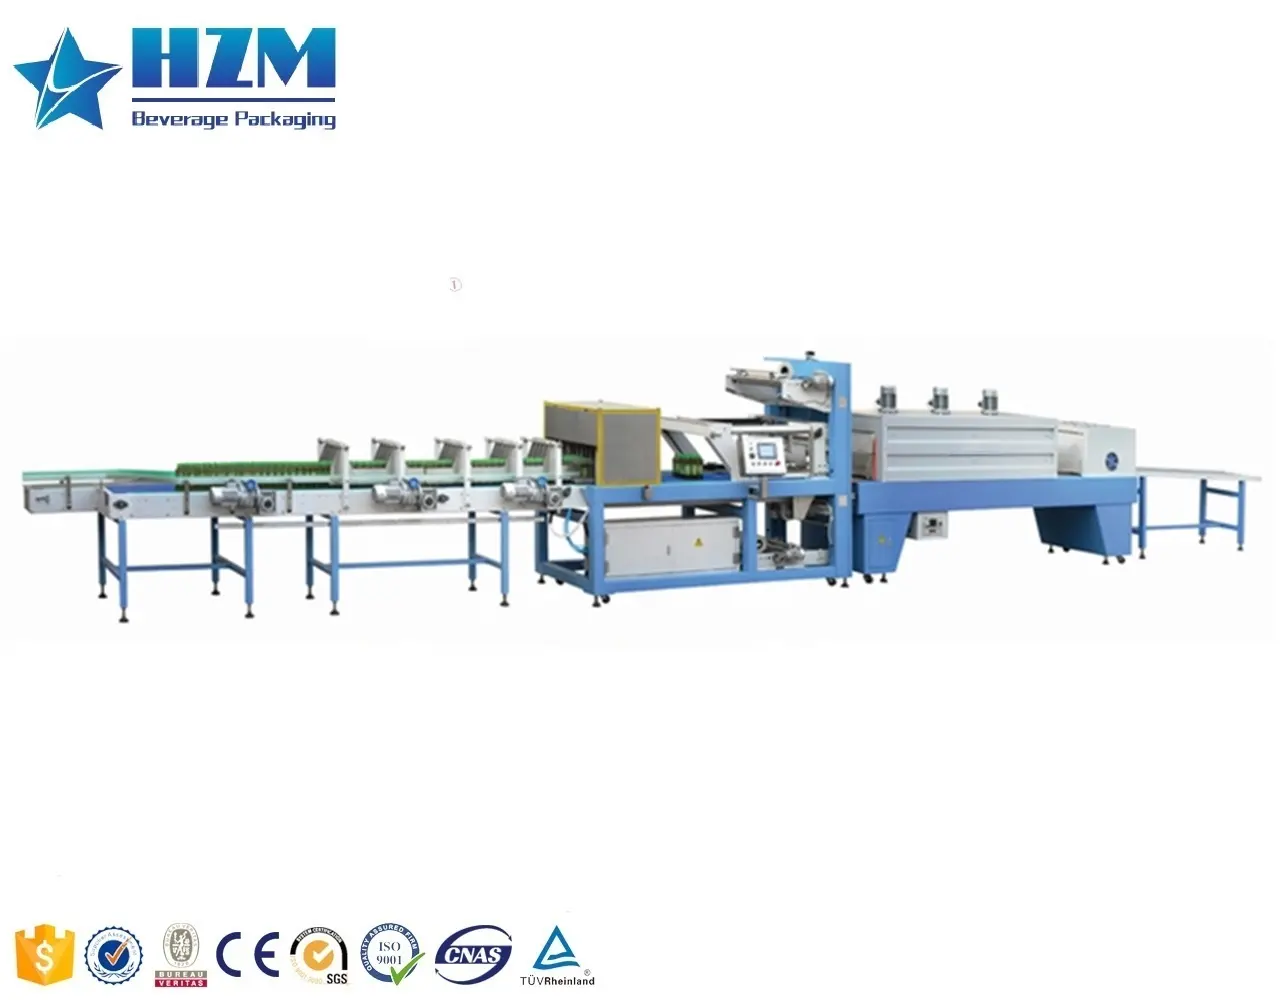 Automatic shrink wrapping machine plastic beverage water bottle shrink packing machine with heat tunnel